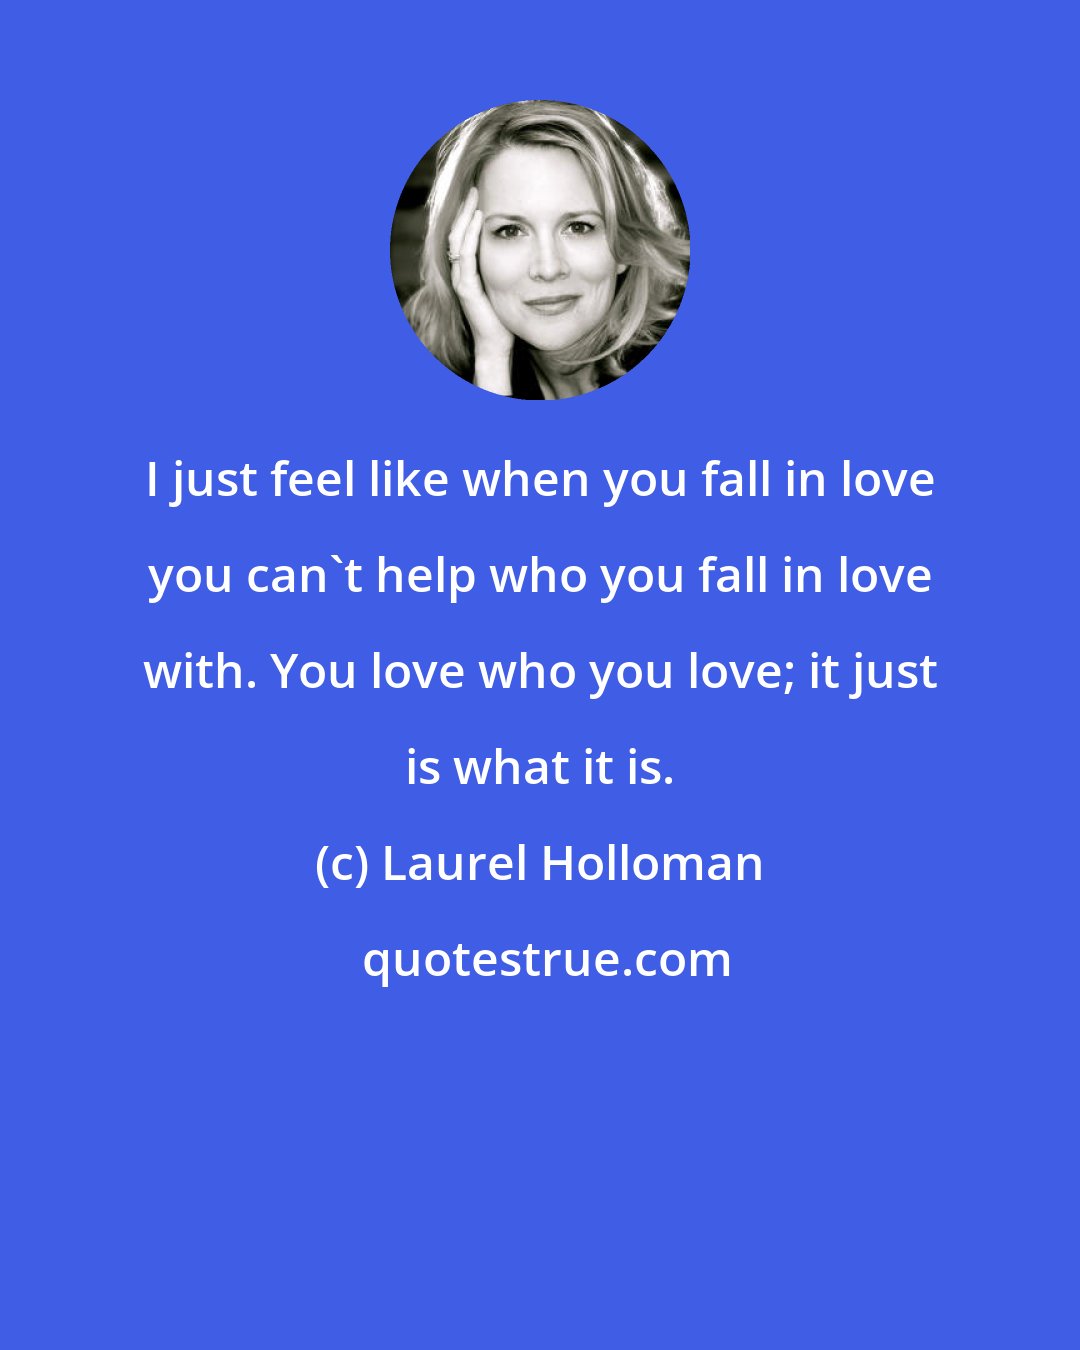 Laurel Holloman: I just feel like when you fall in love you can't help who you fall in love with. You love who you love; it just is what it is.